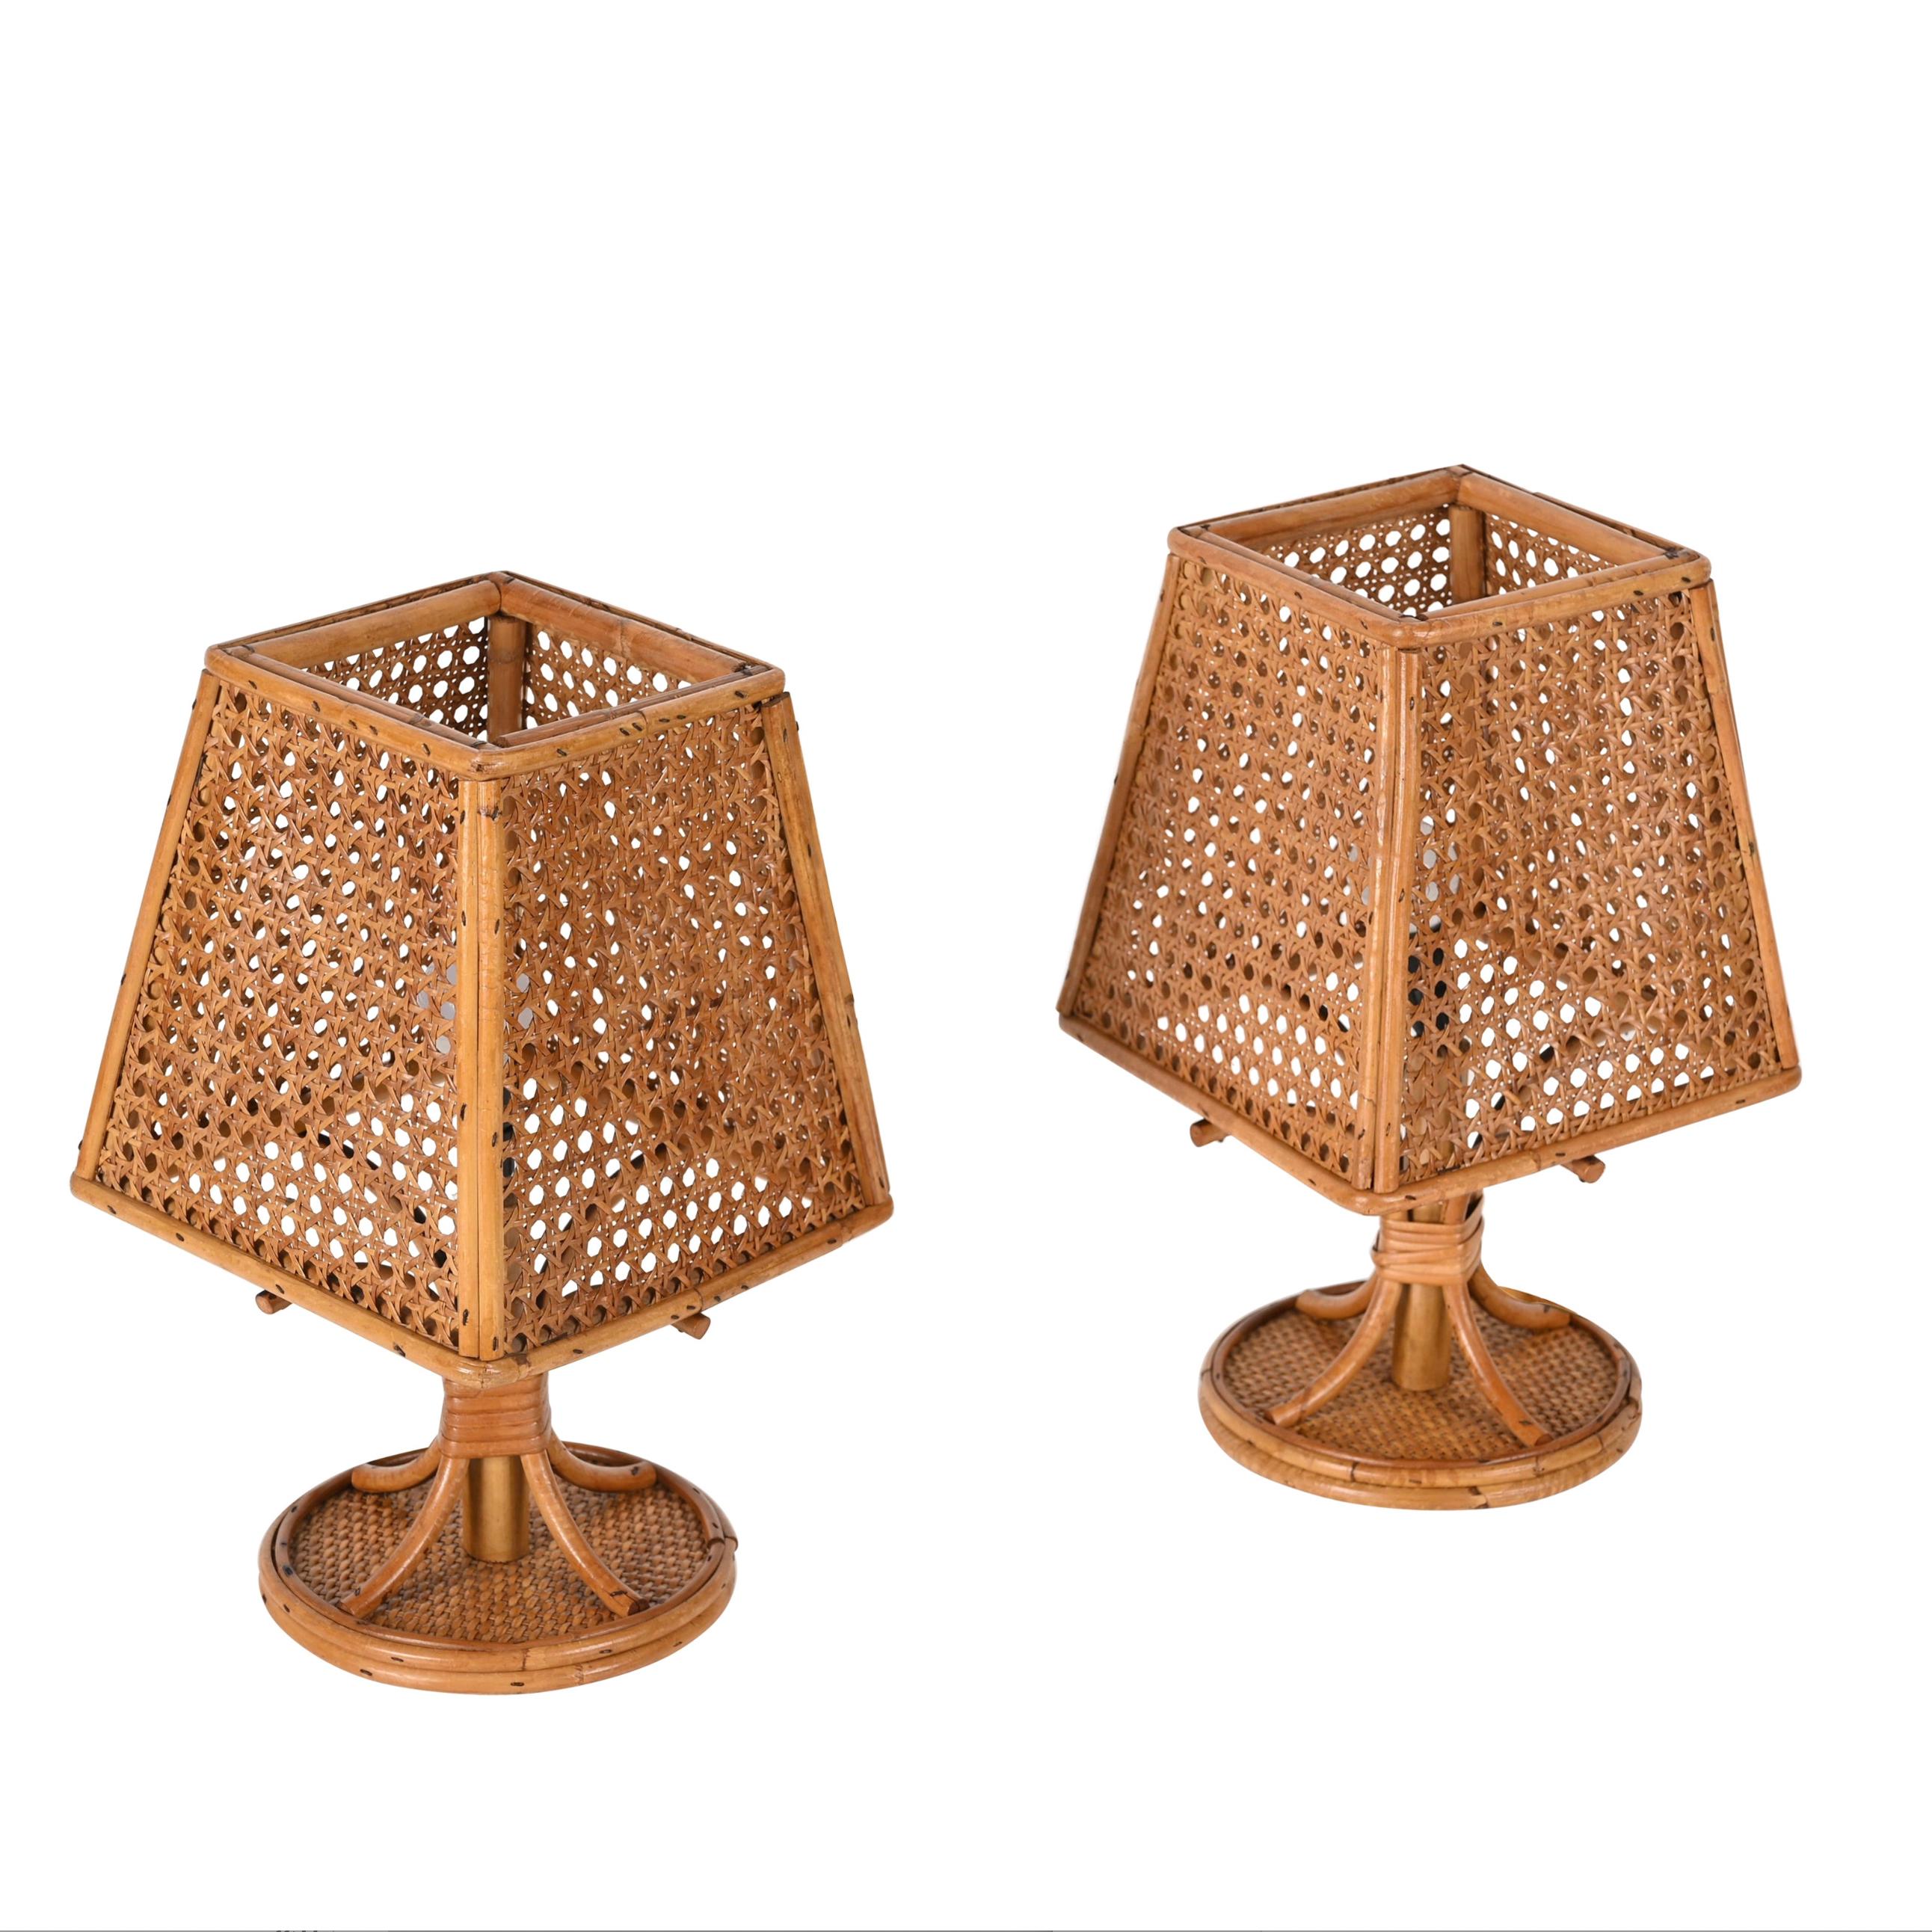 Hand-Crafted Pair of French Riviera Table Lamps in Wicker and Rattan, Italy 1960s For Sale